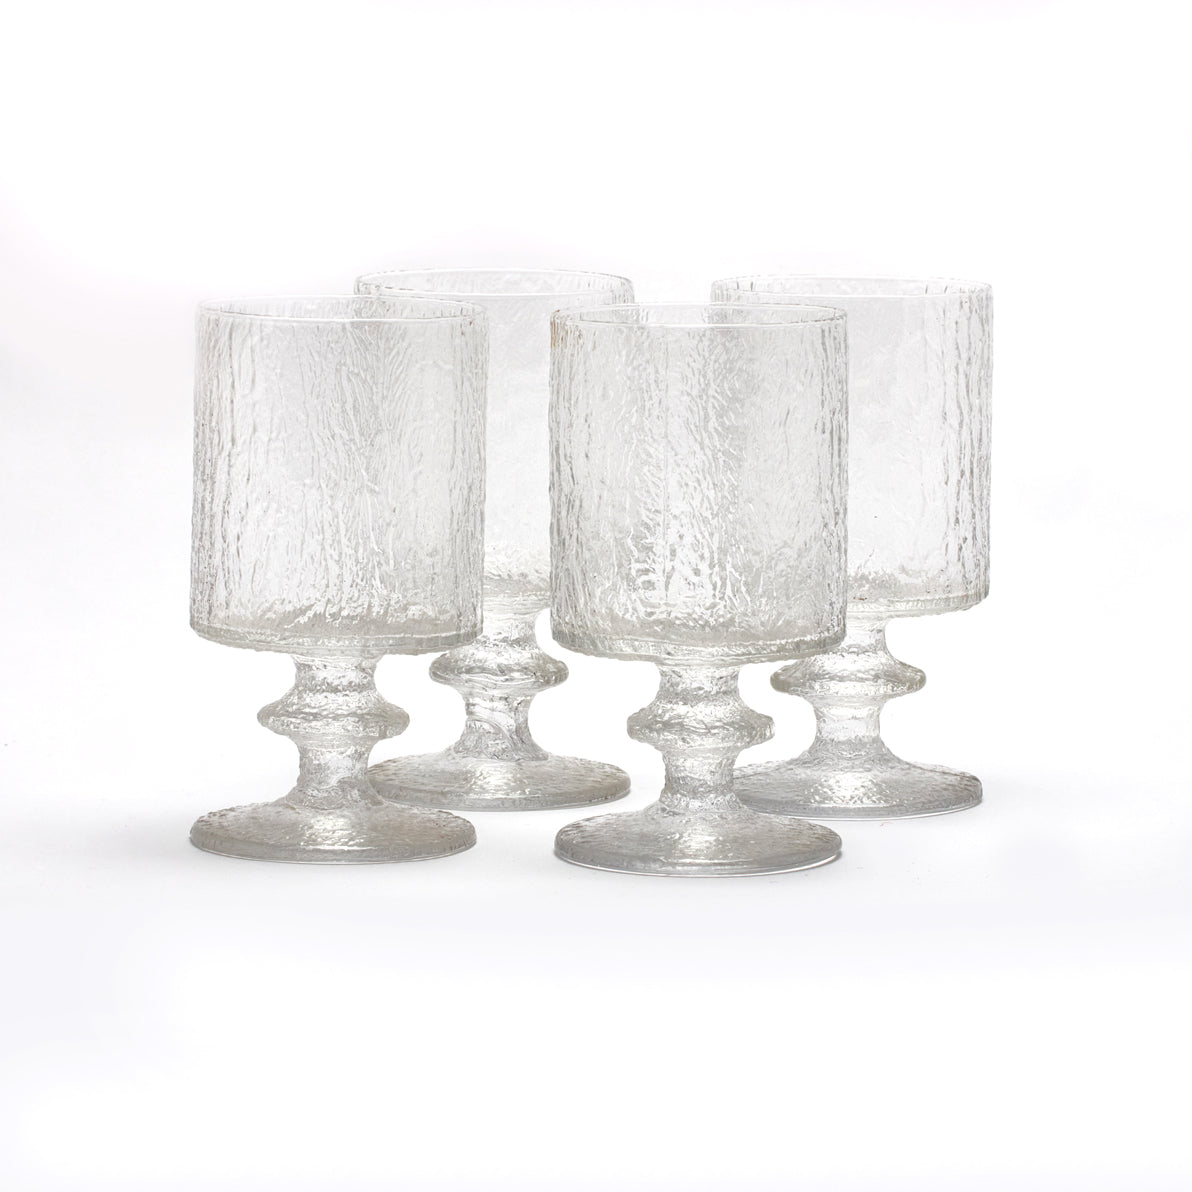 ICY GLASS GOBLETS, 1960s (sold out)